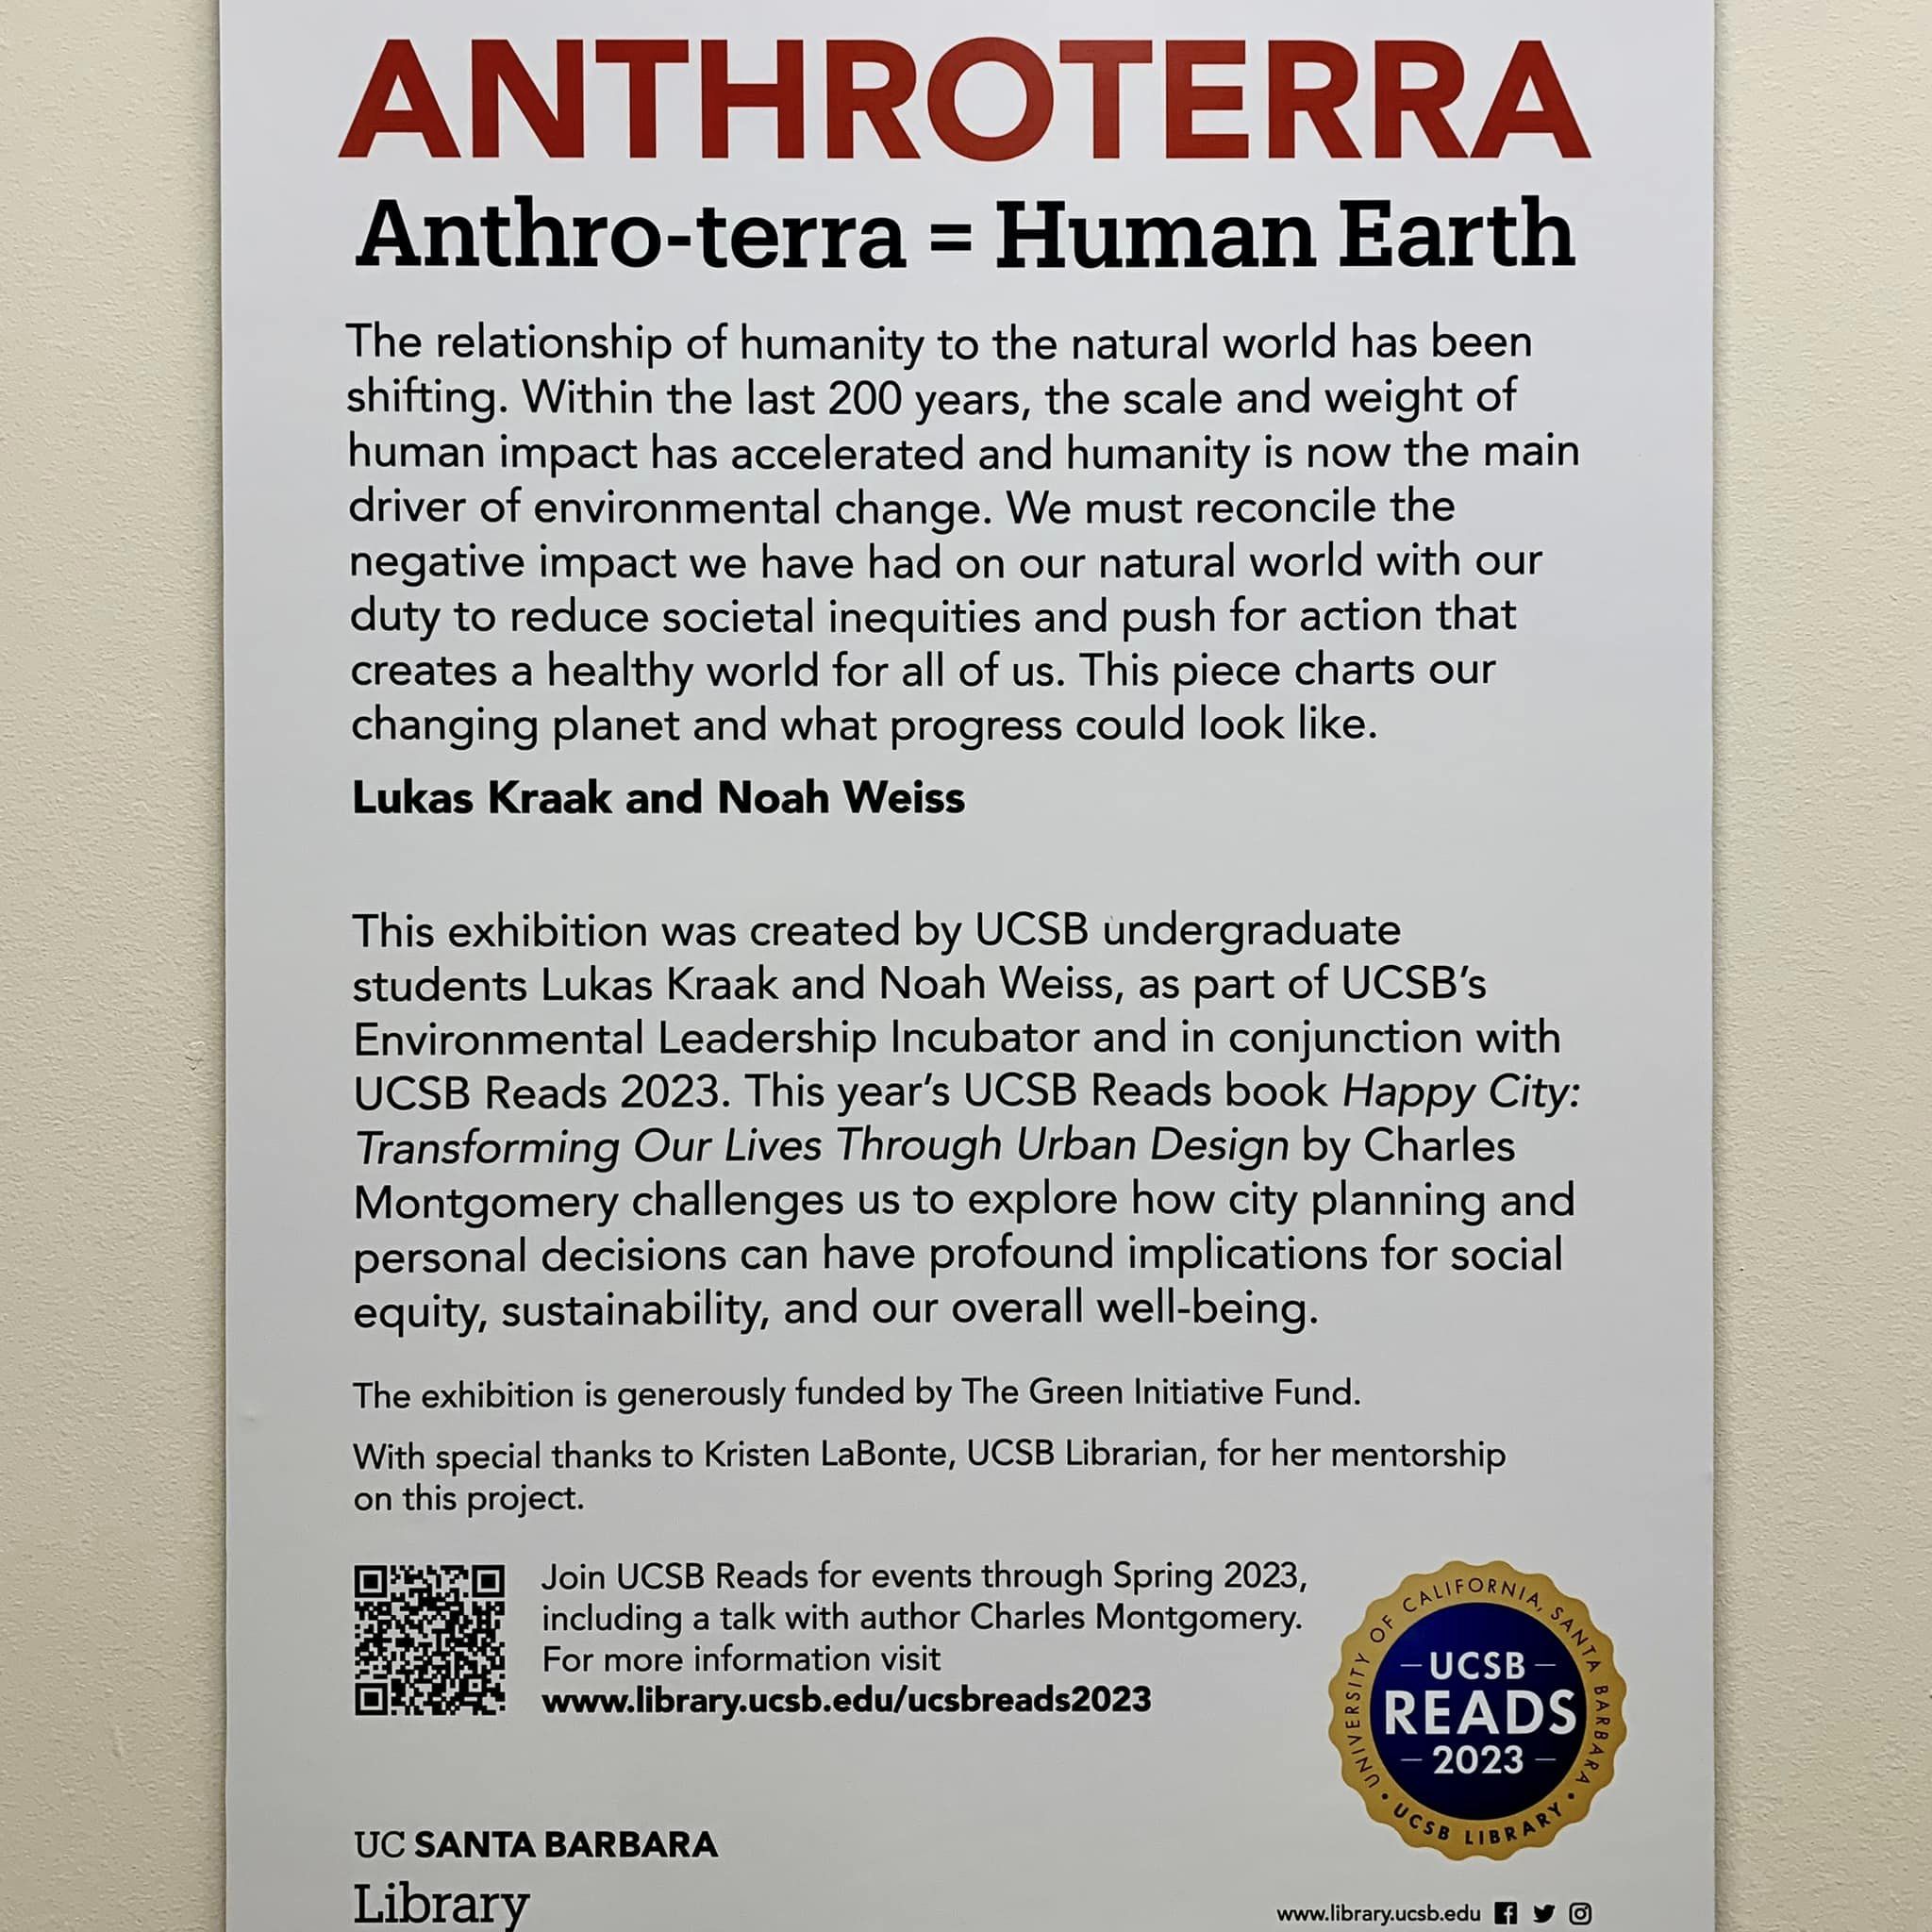 Anthroterra (Human Earth): An exhibit at UCSB Library (description)